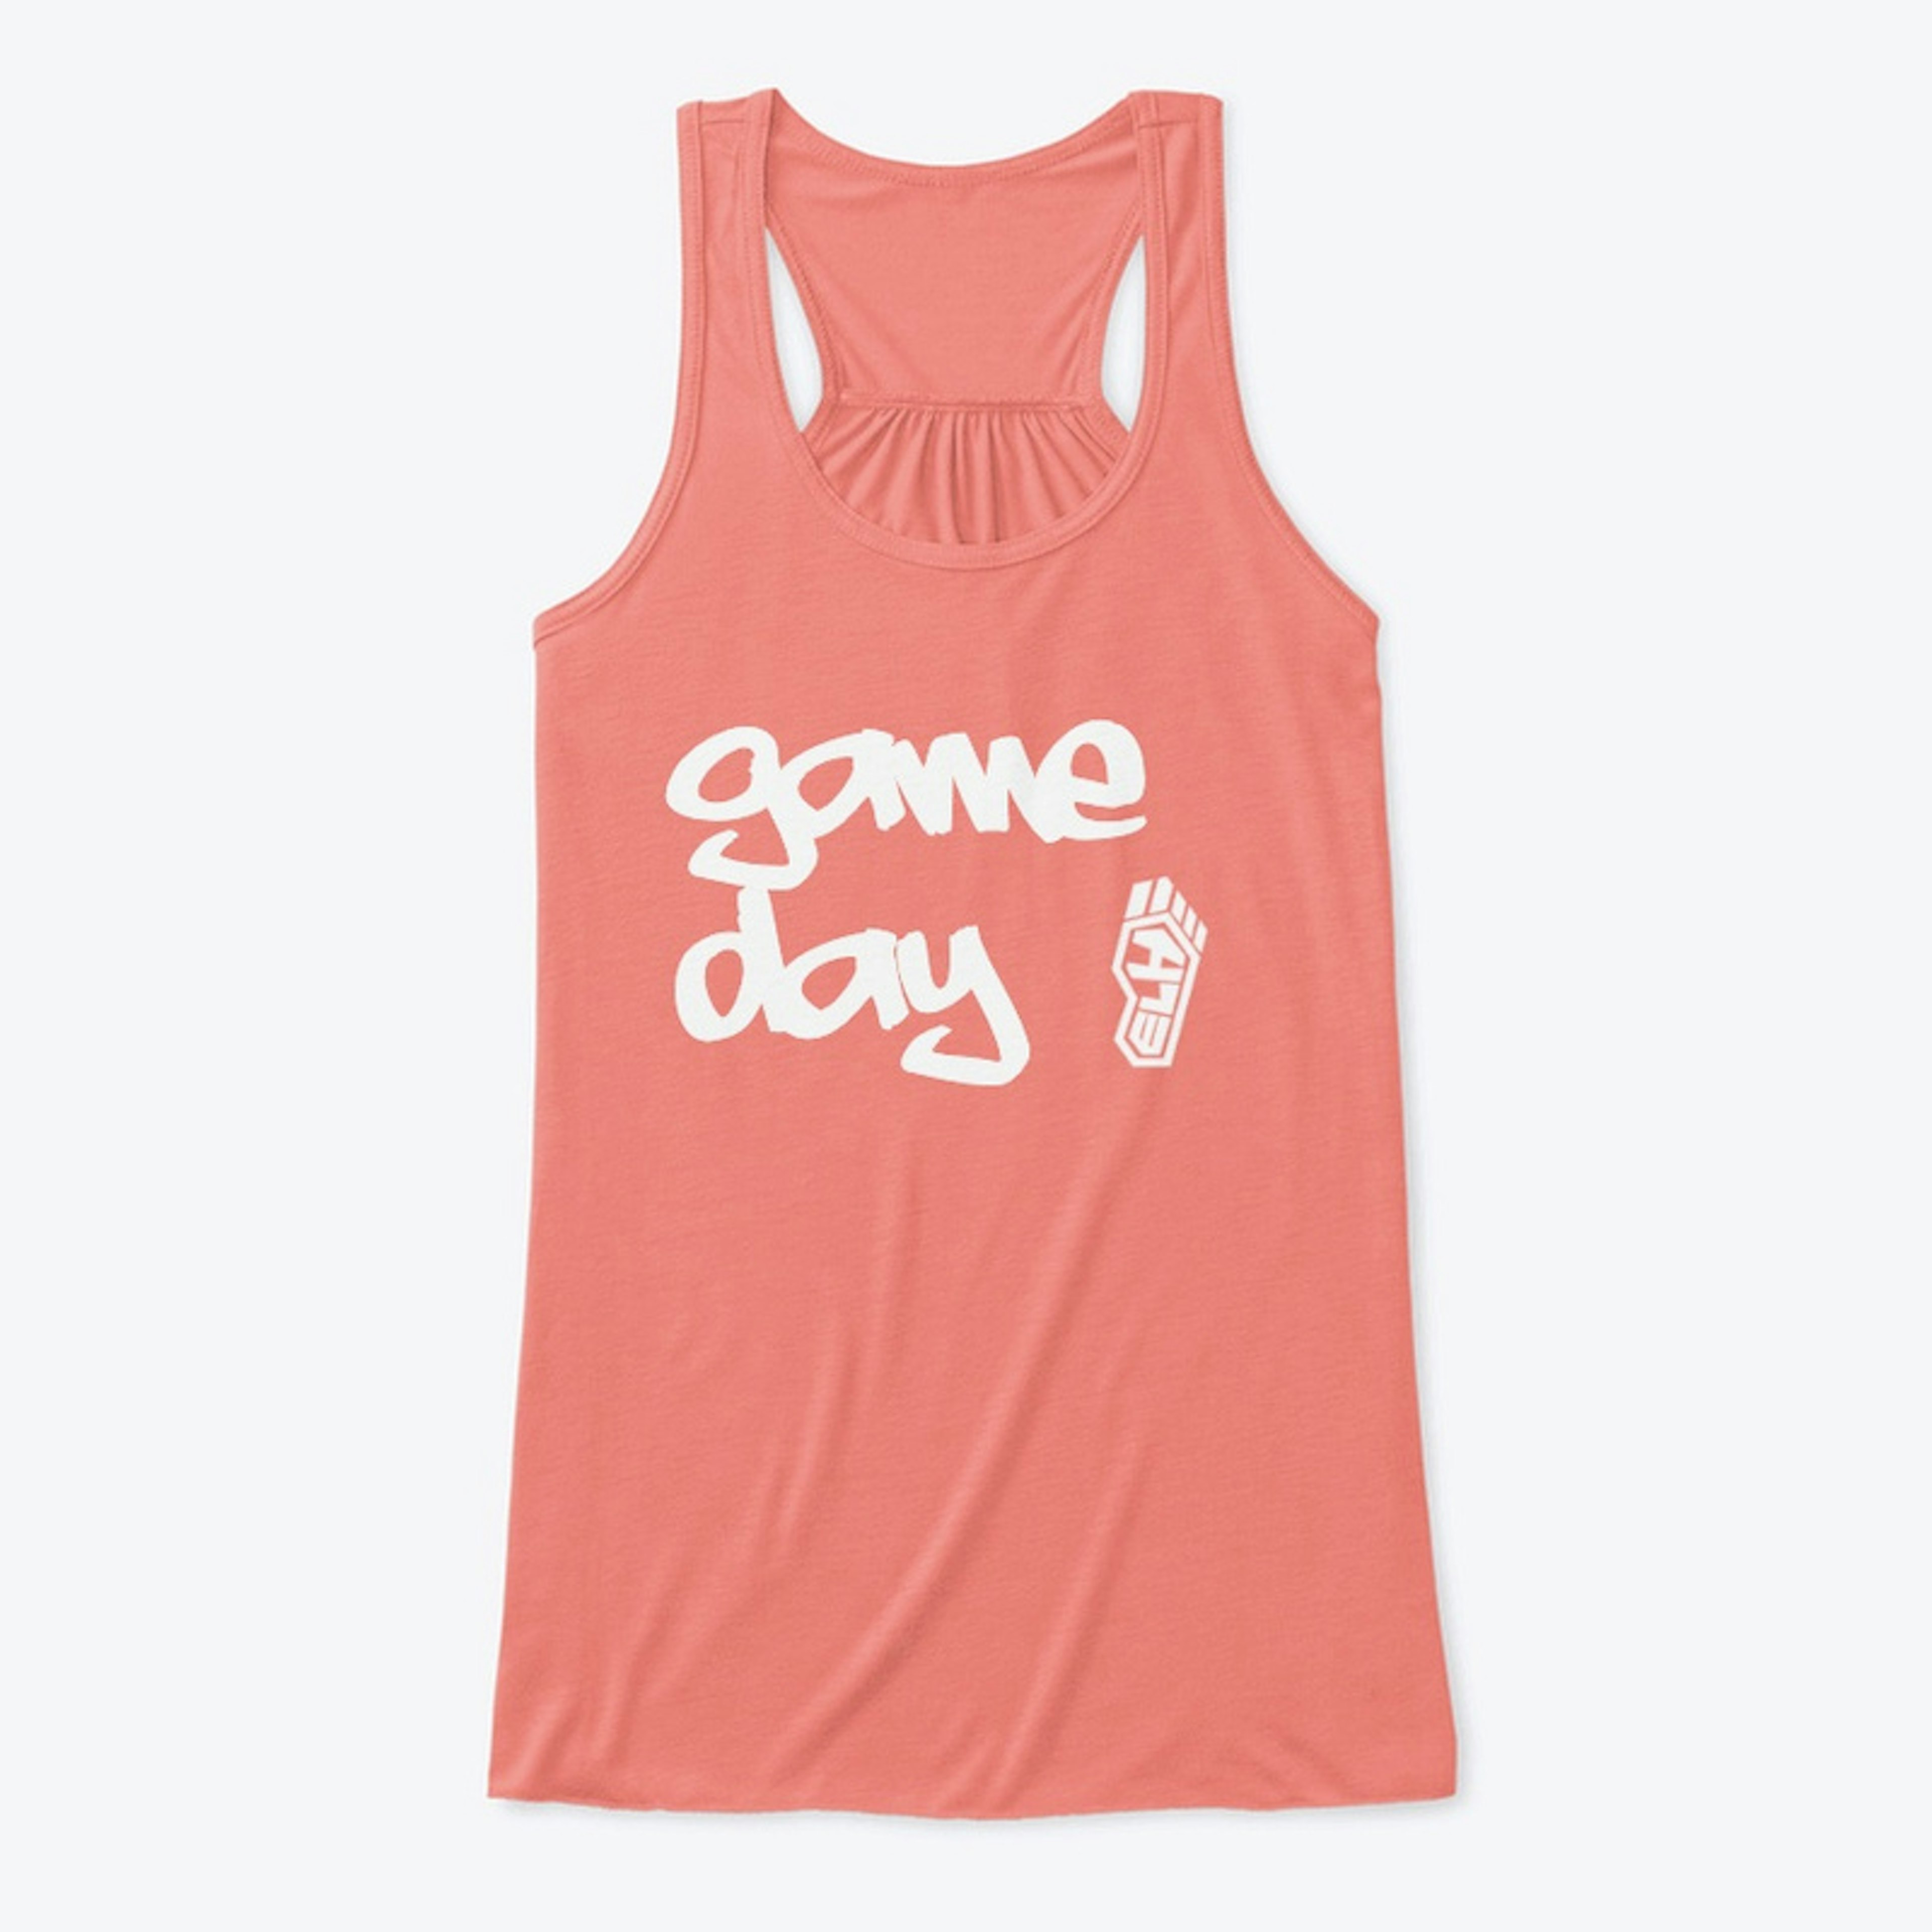 Womens "Game Day" Tank